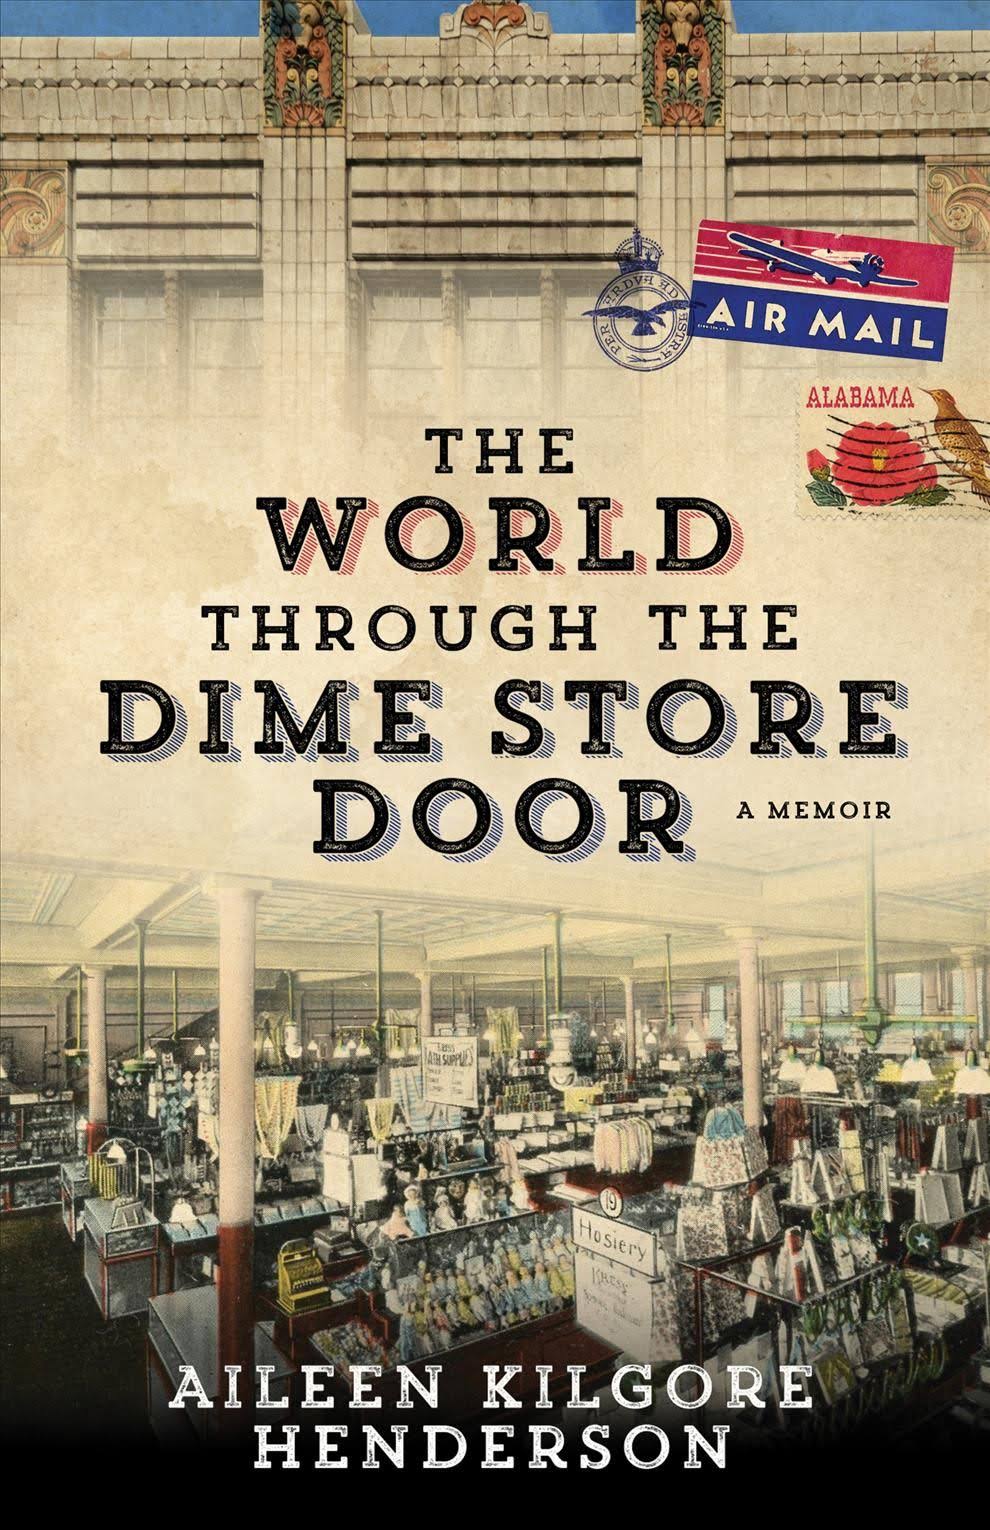 The World Through The Dime Store Door by Aileen Kilgore Henderson